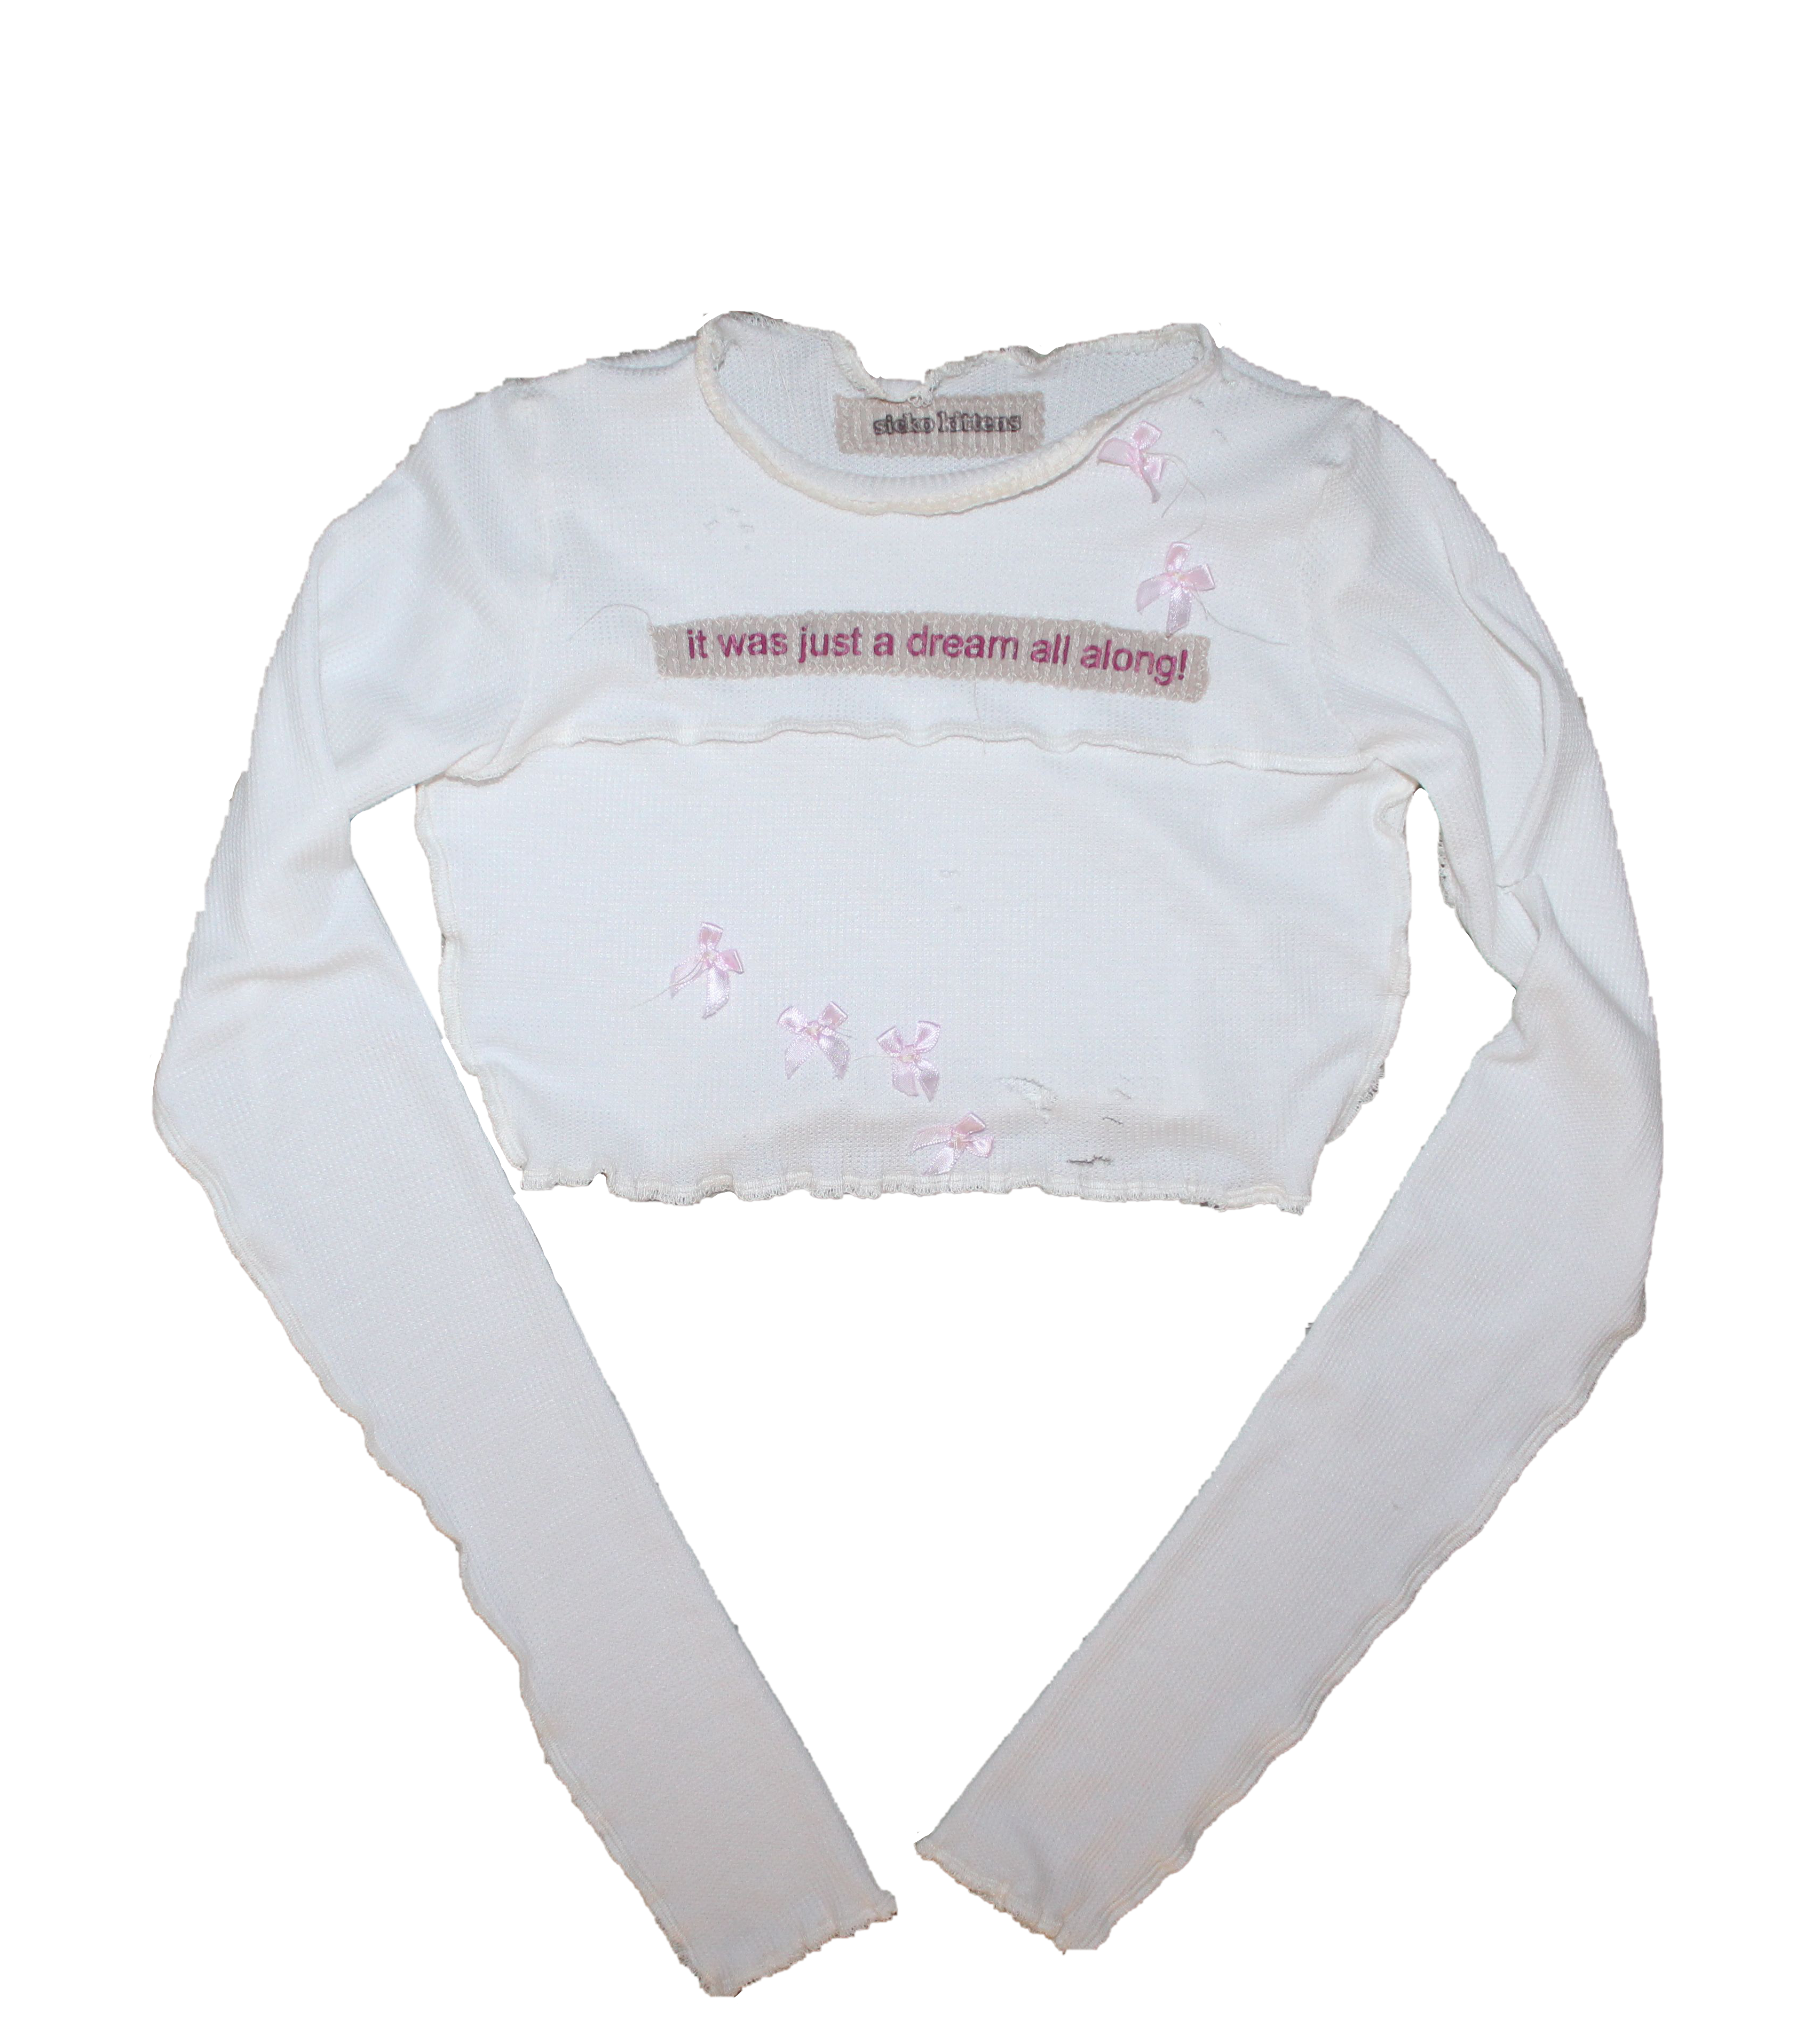 { It was just a dream all along! ,.>< [ Pink Longsleeve .] }